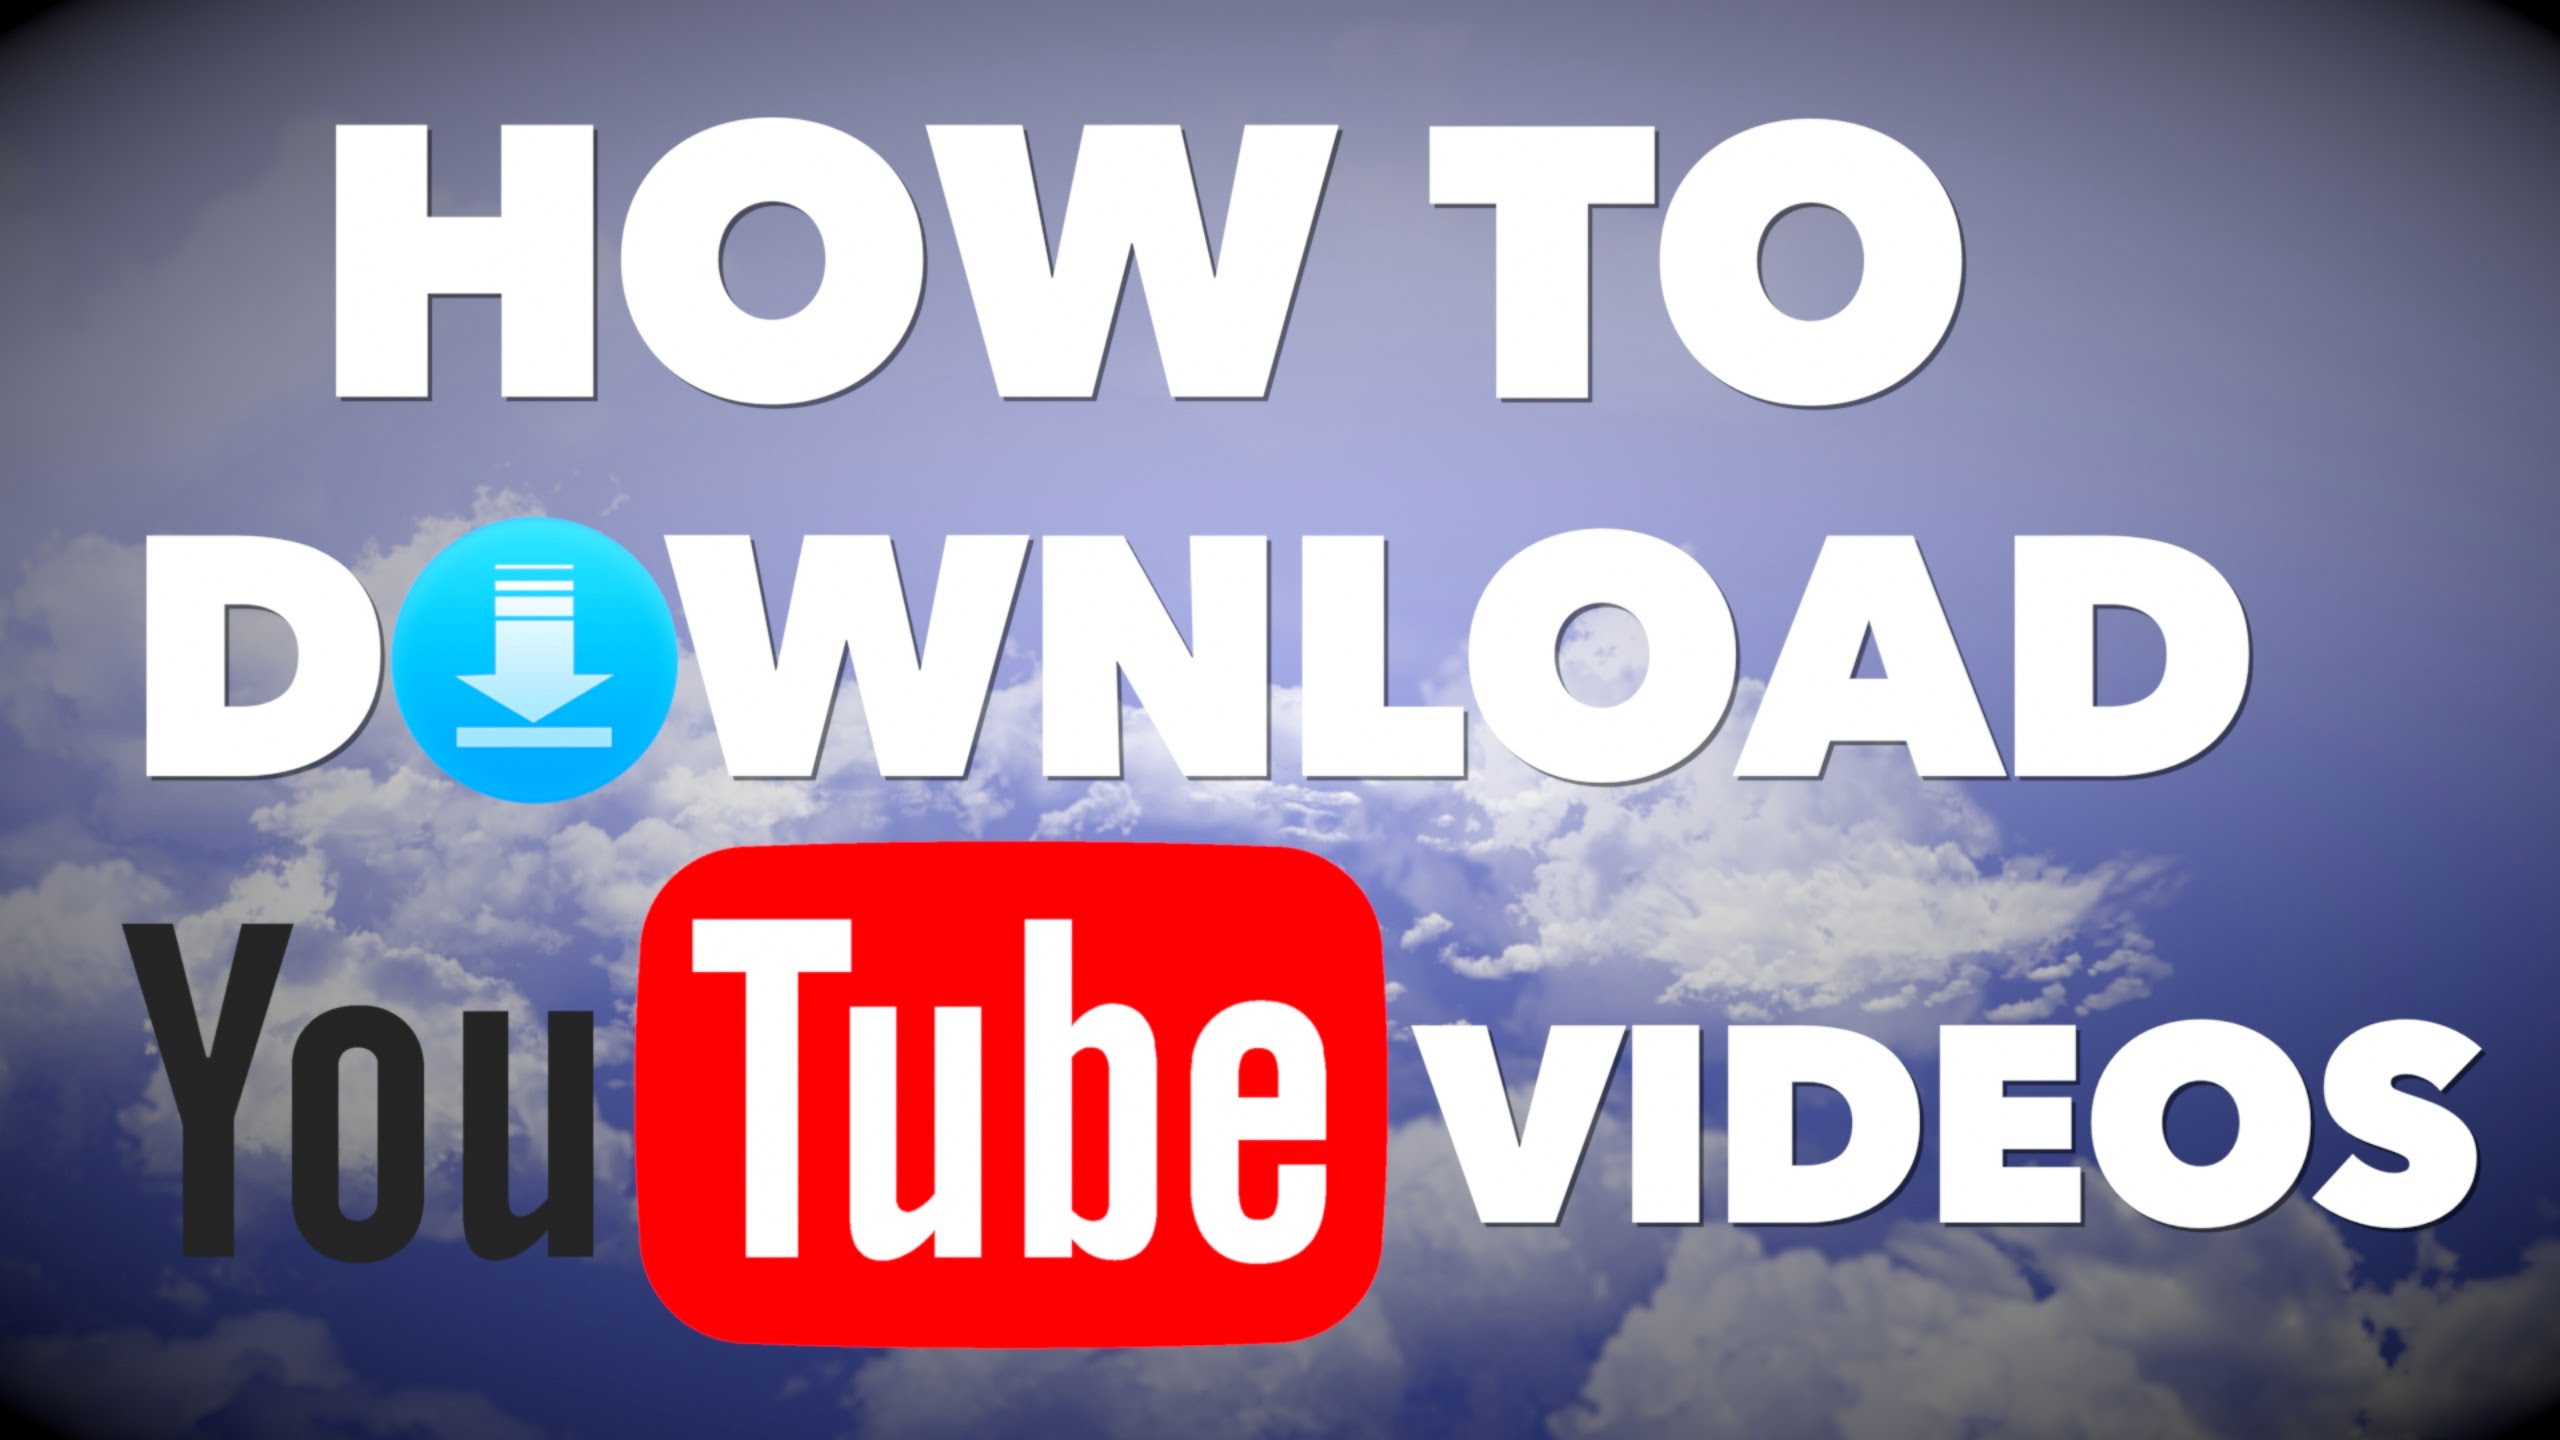 youtue download